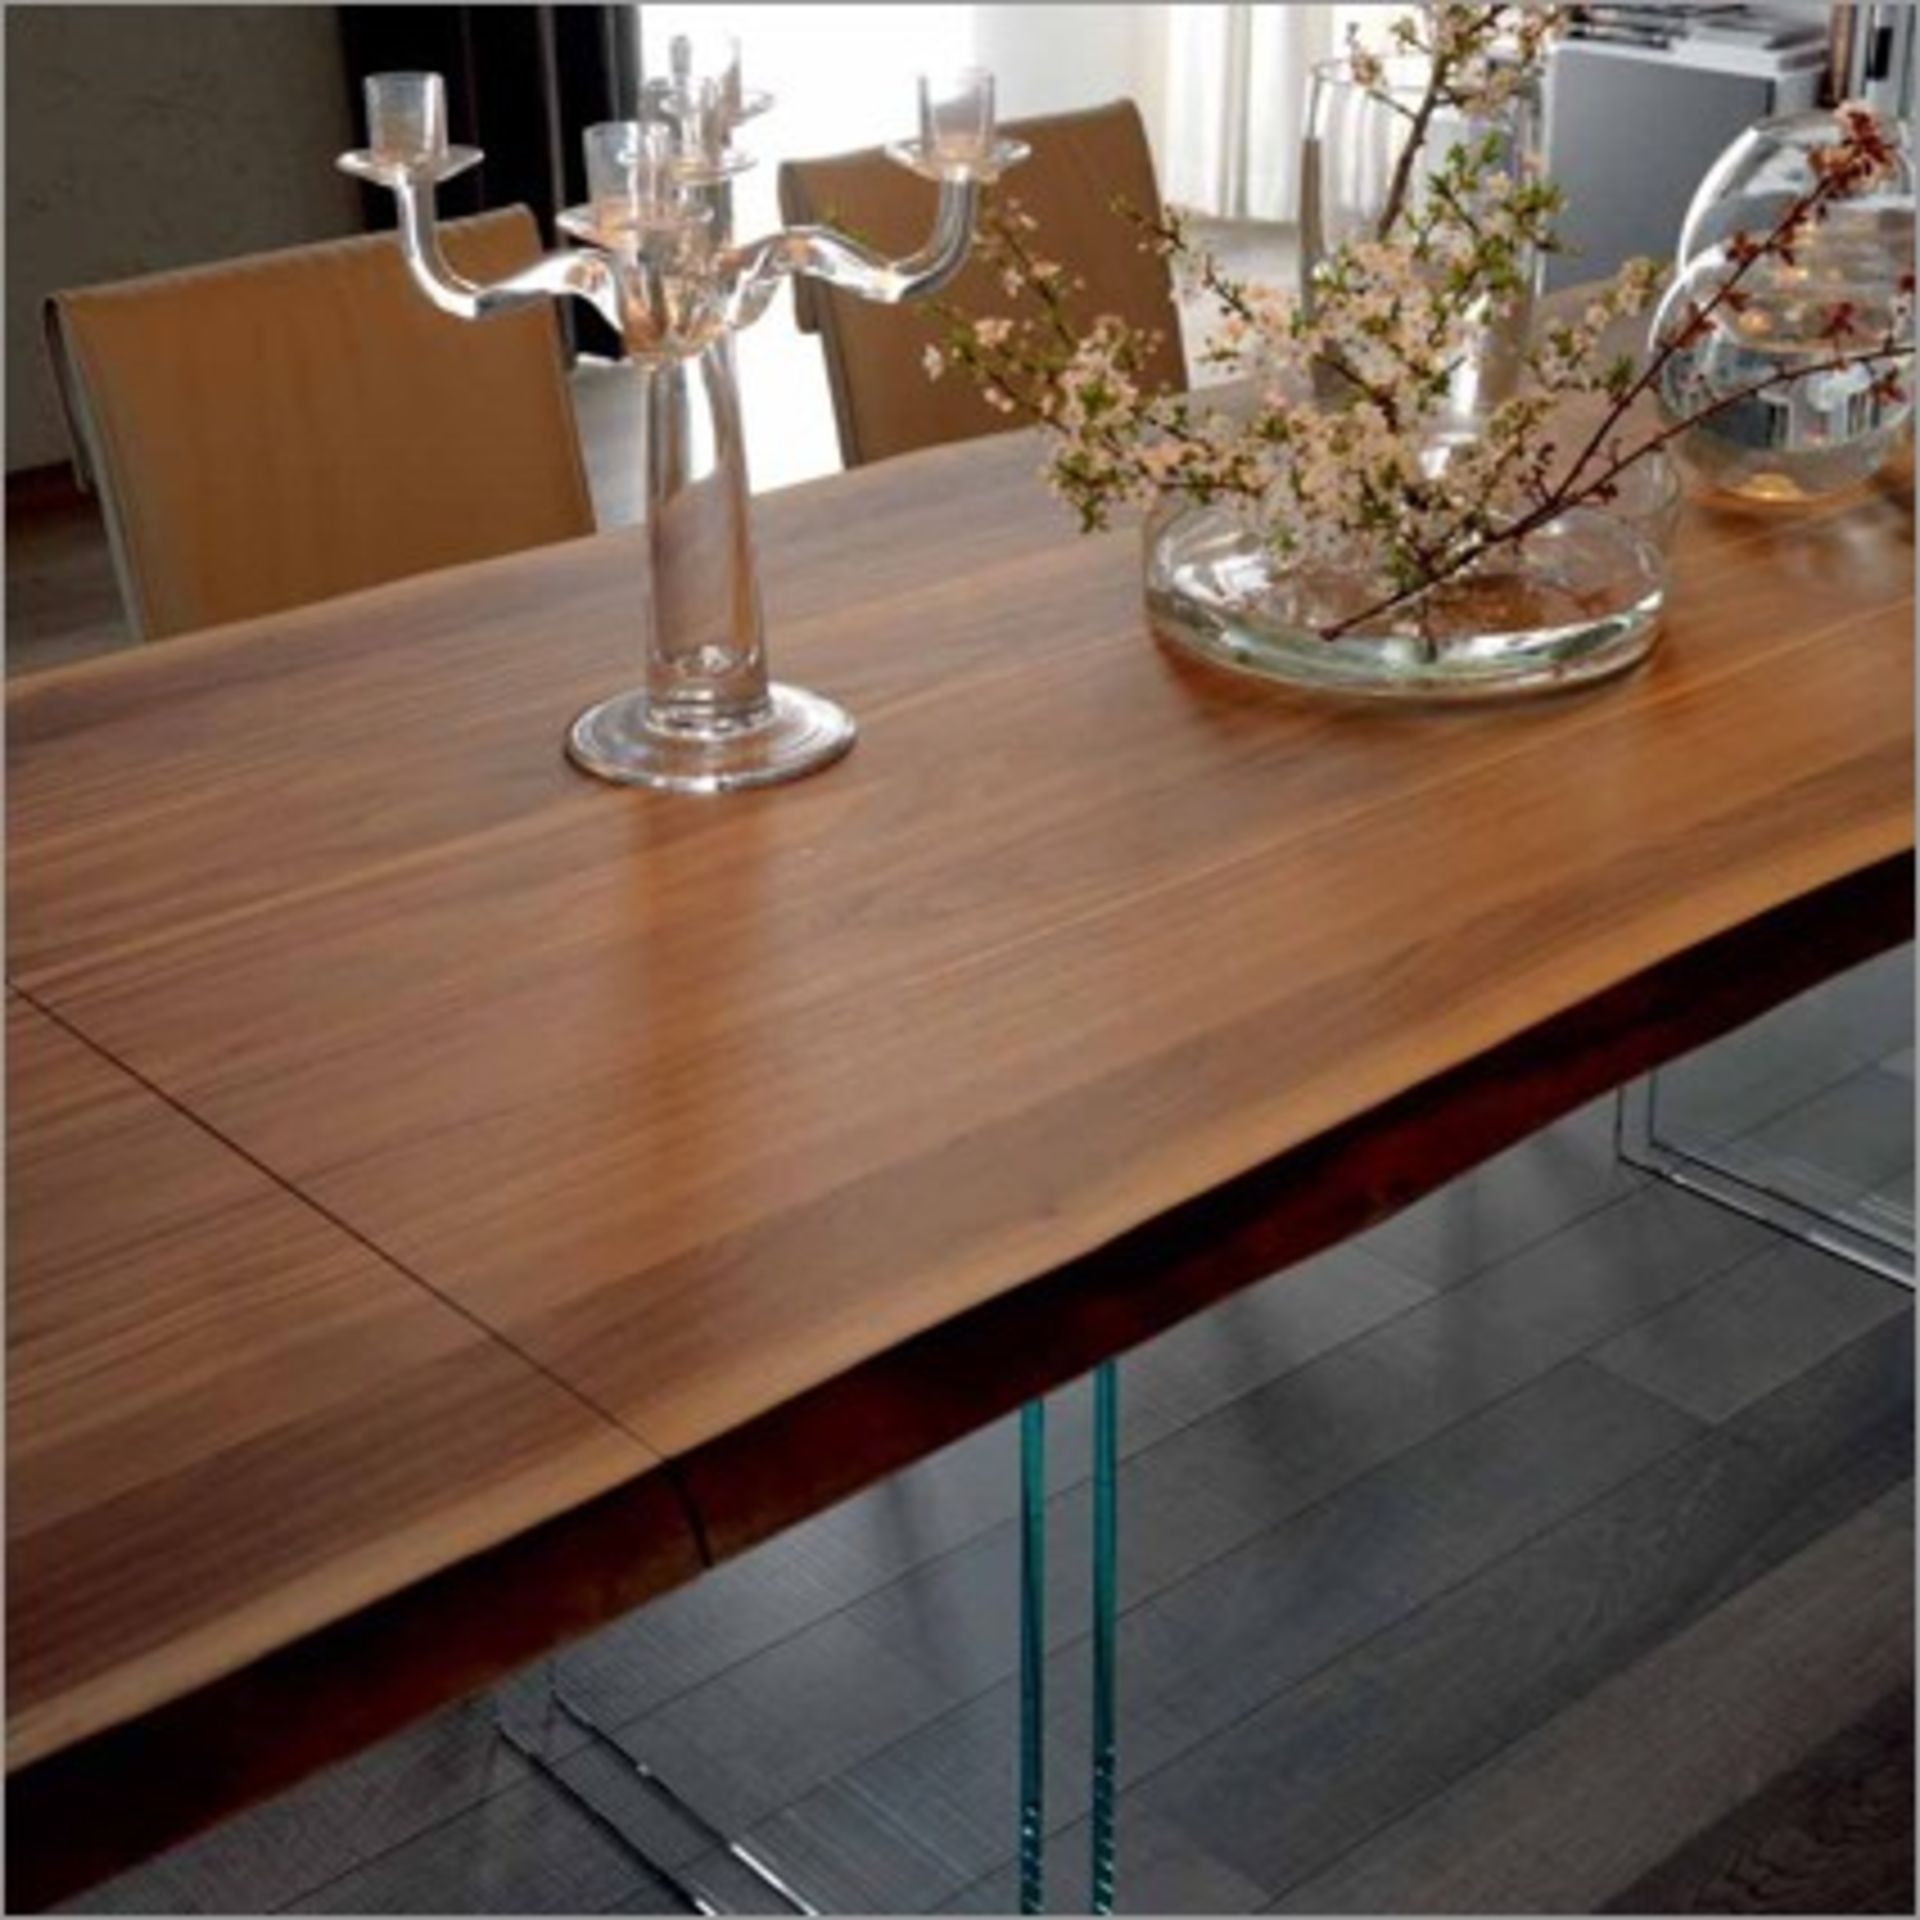 1 x Cattelan Ikon Drive Table Top - Base Not Included - 240x120cm - Ref: 3511316 - CL087 - Location: - Image 11 of 27